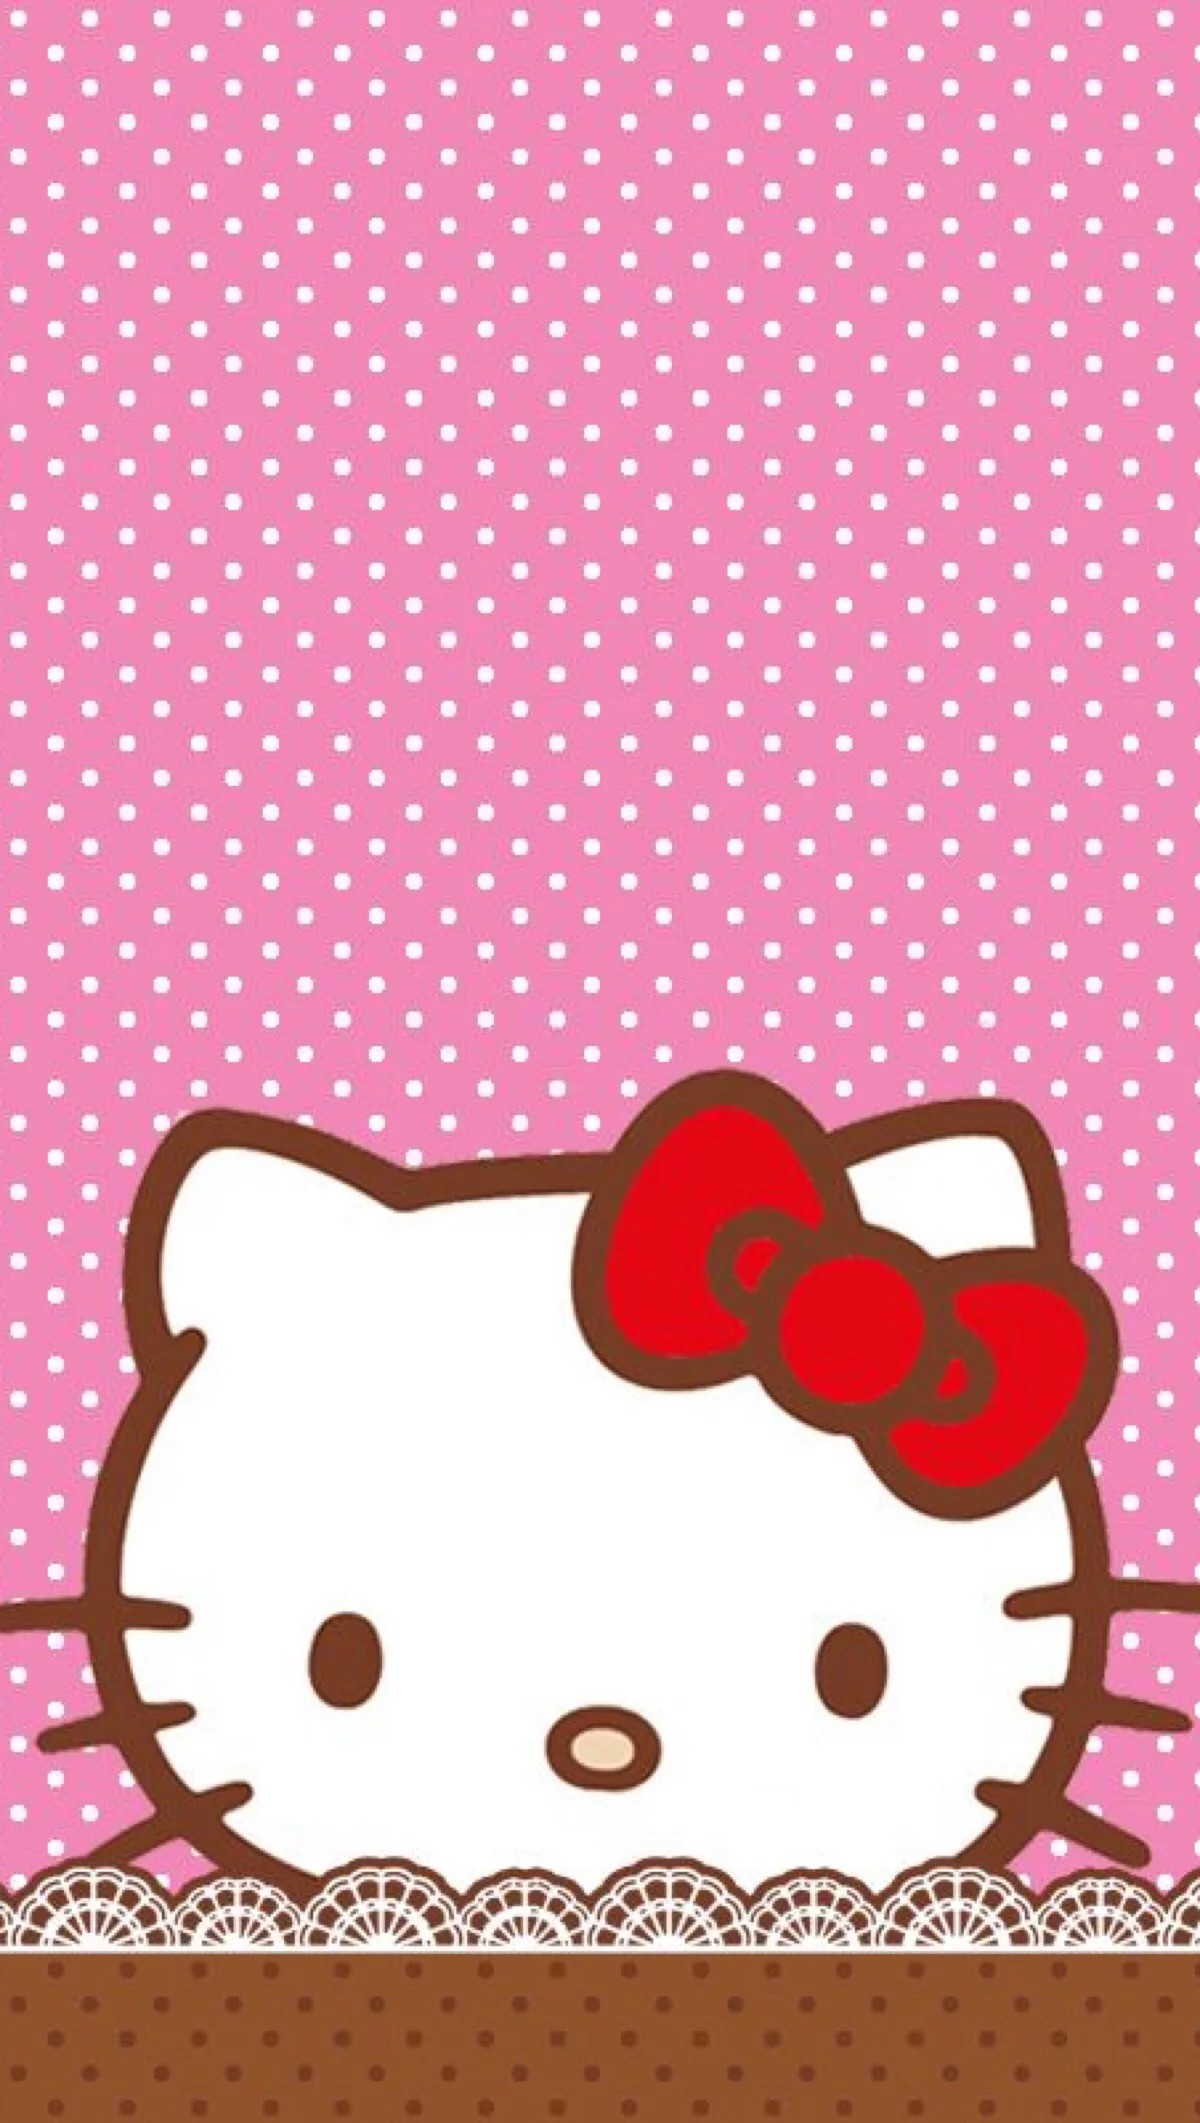 Free download wallpaper hello kitty love images x for your desktop mobile tablet explore wallpapers of kitty images of hello kitty wallpapers backgrounds of hello kitty wallpaper of kitty